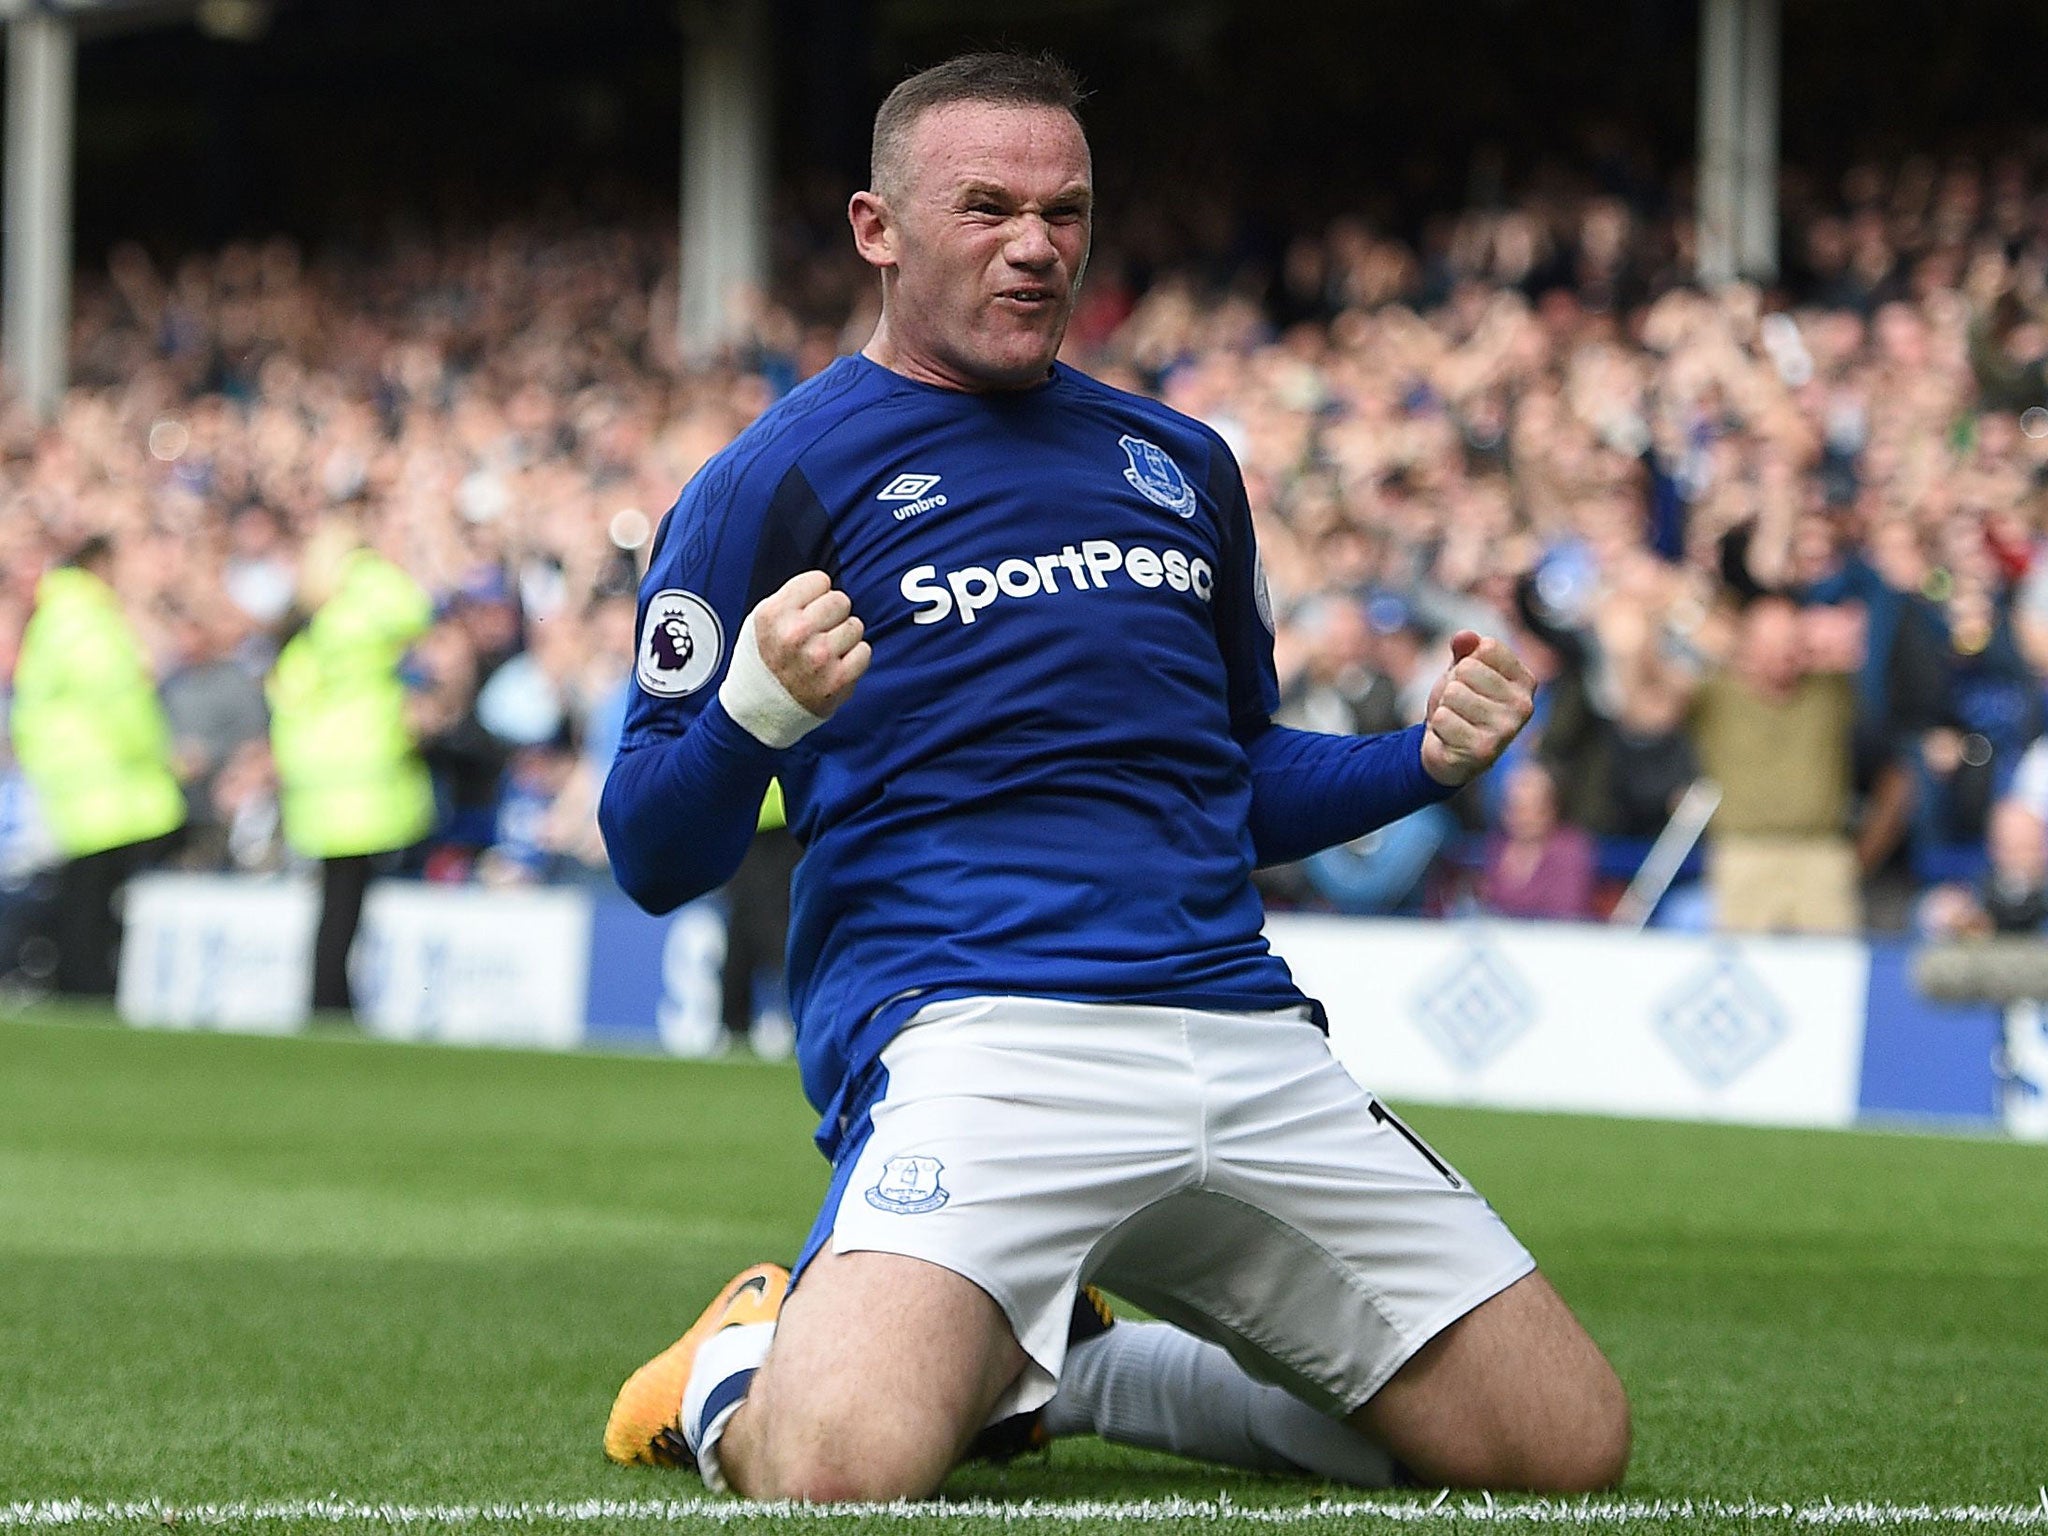 Wayne Rooney believes he has taken the toughest challenge by returning to Everton